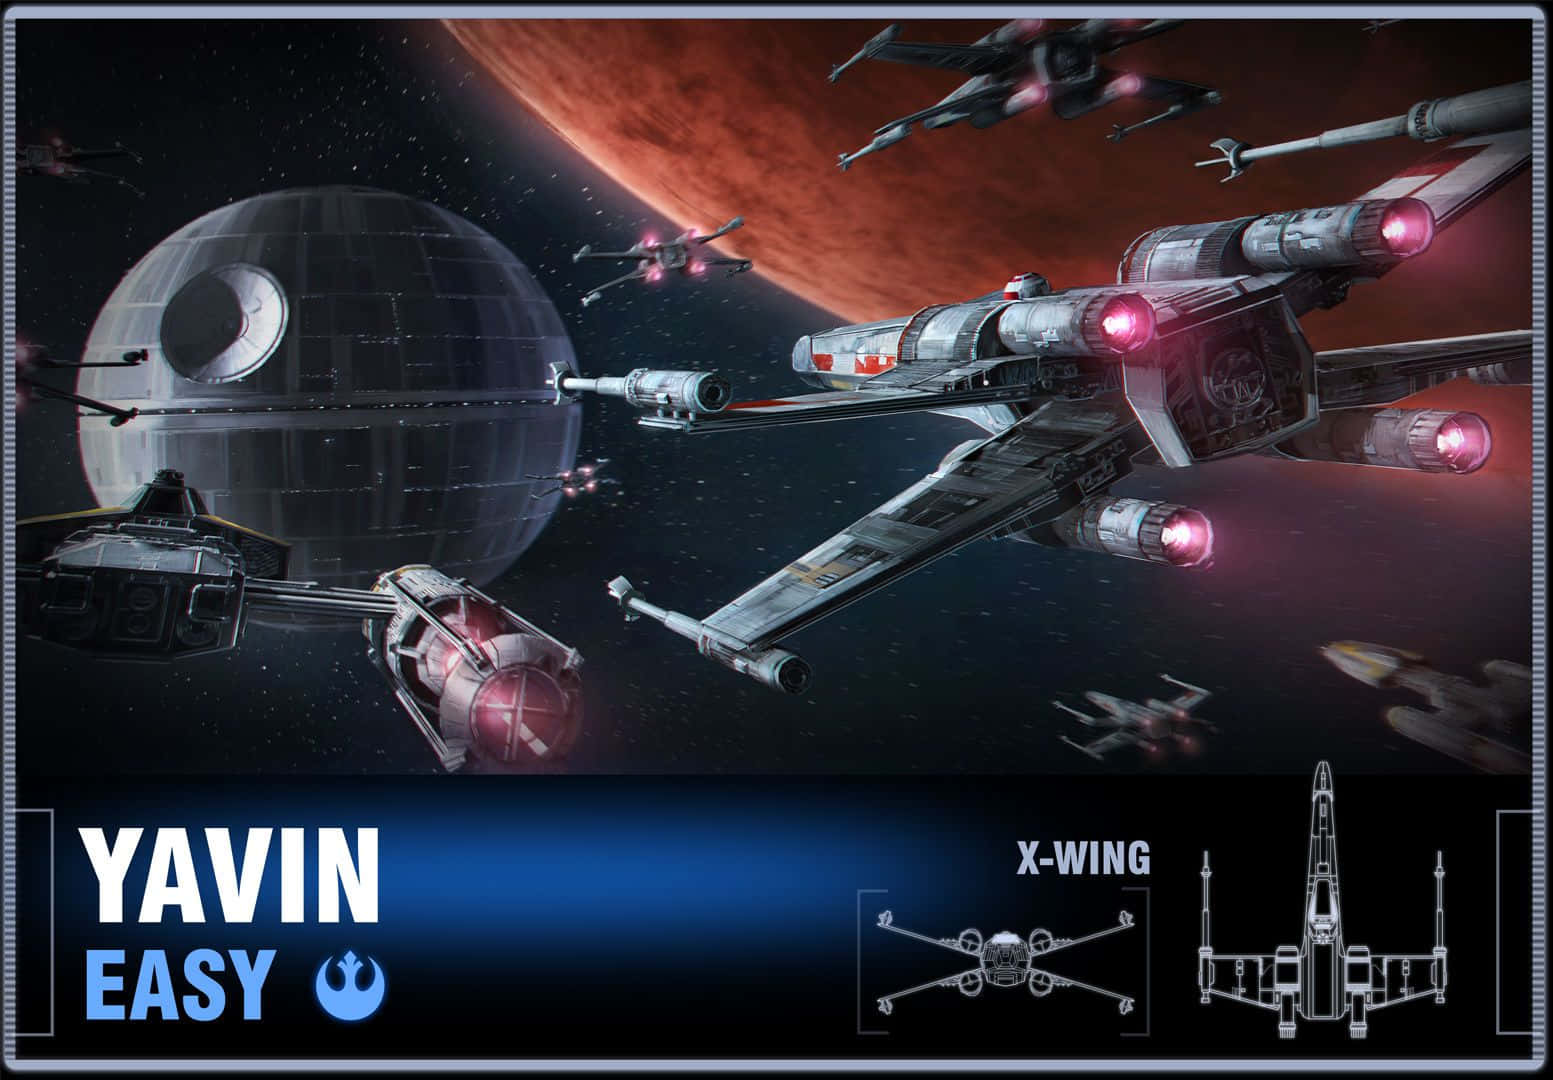 The X-wing Fighters Shown During The Battle Of Yavin Wallpaper